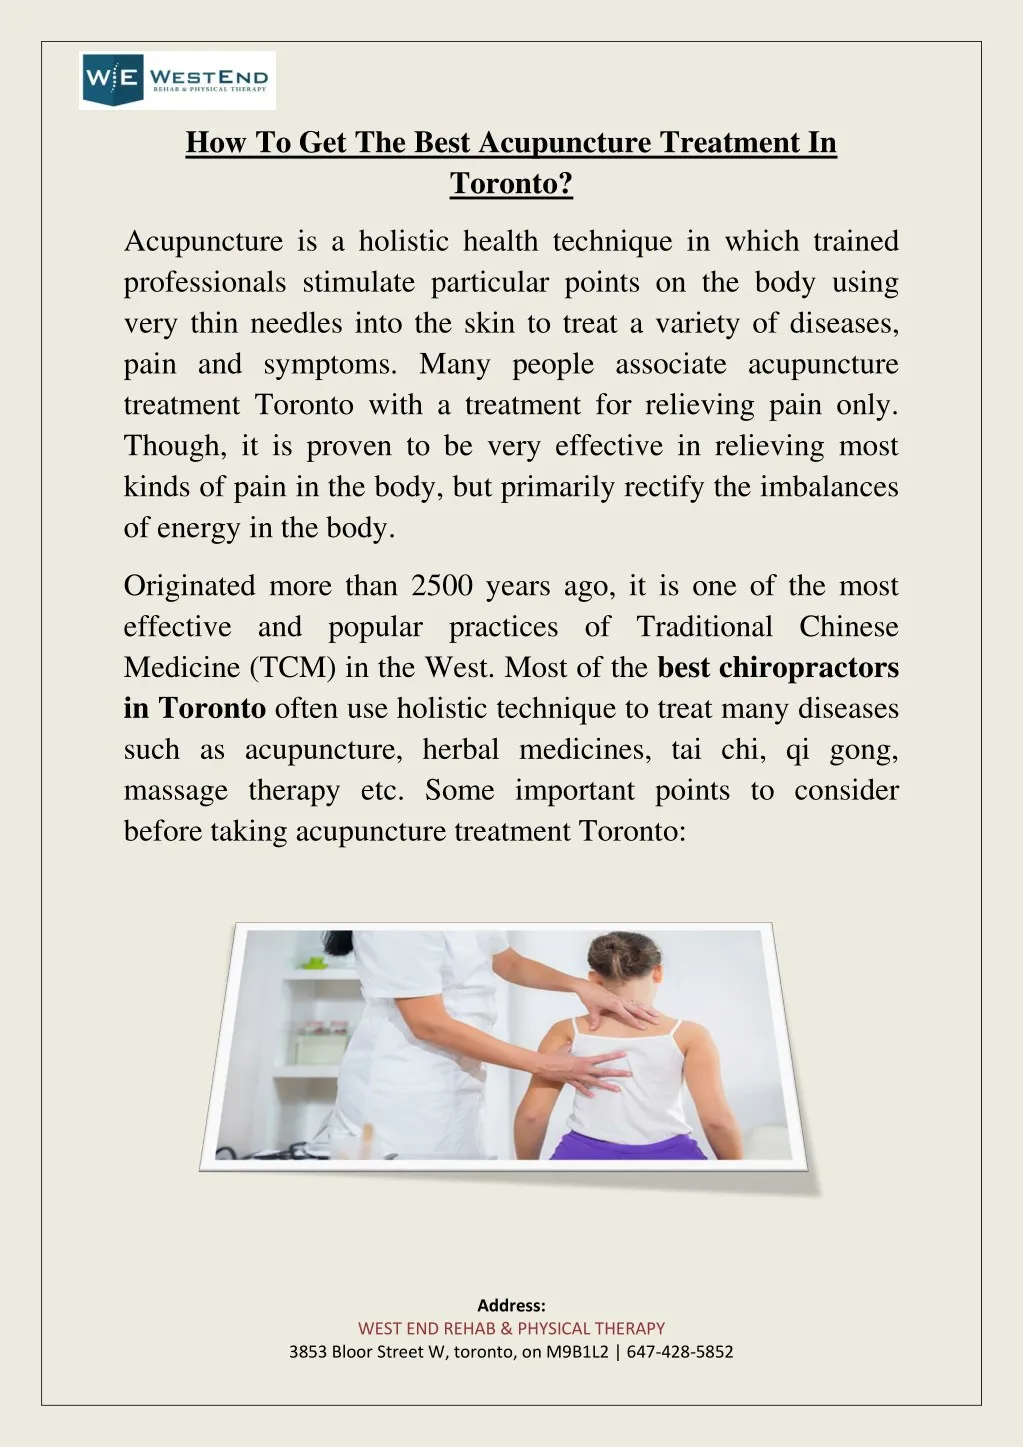 Physiotherapy Treatment for Coccydynia (Tailbone Pain) Management - By Dr.  Rajveer Singh(pt)